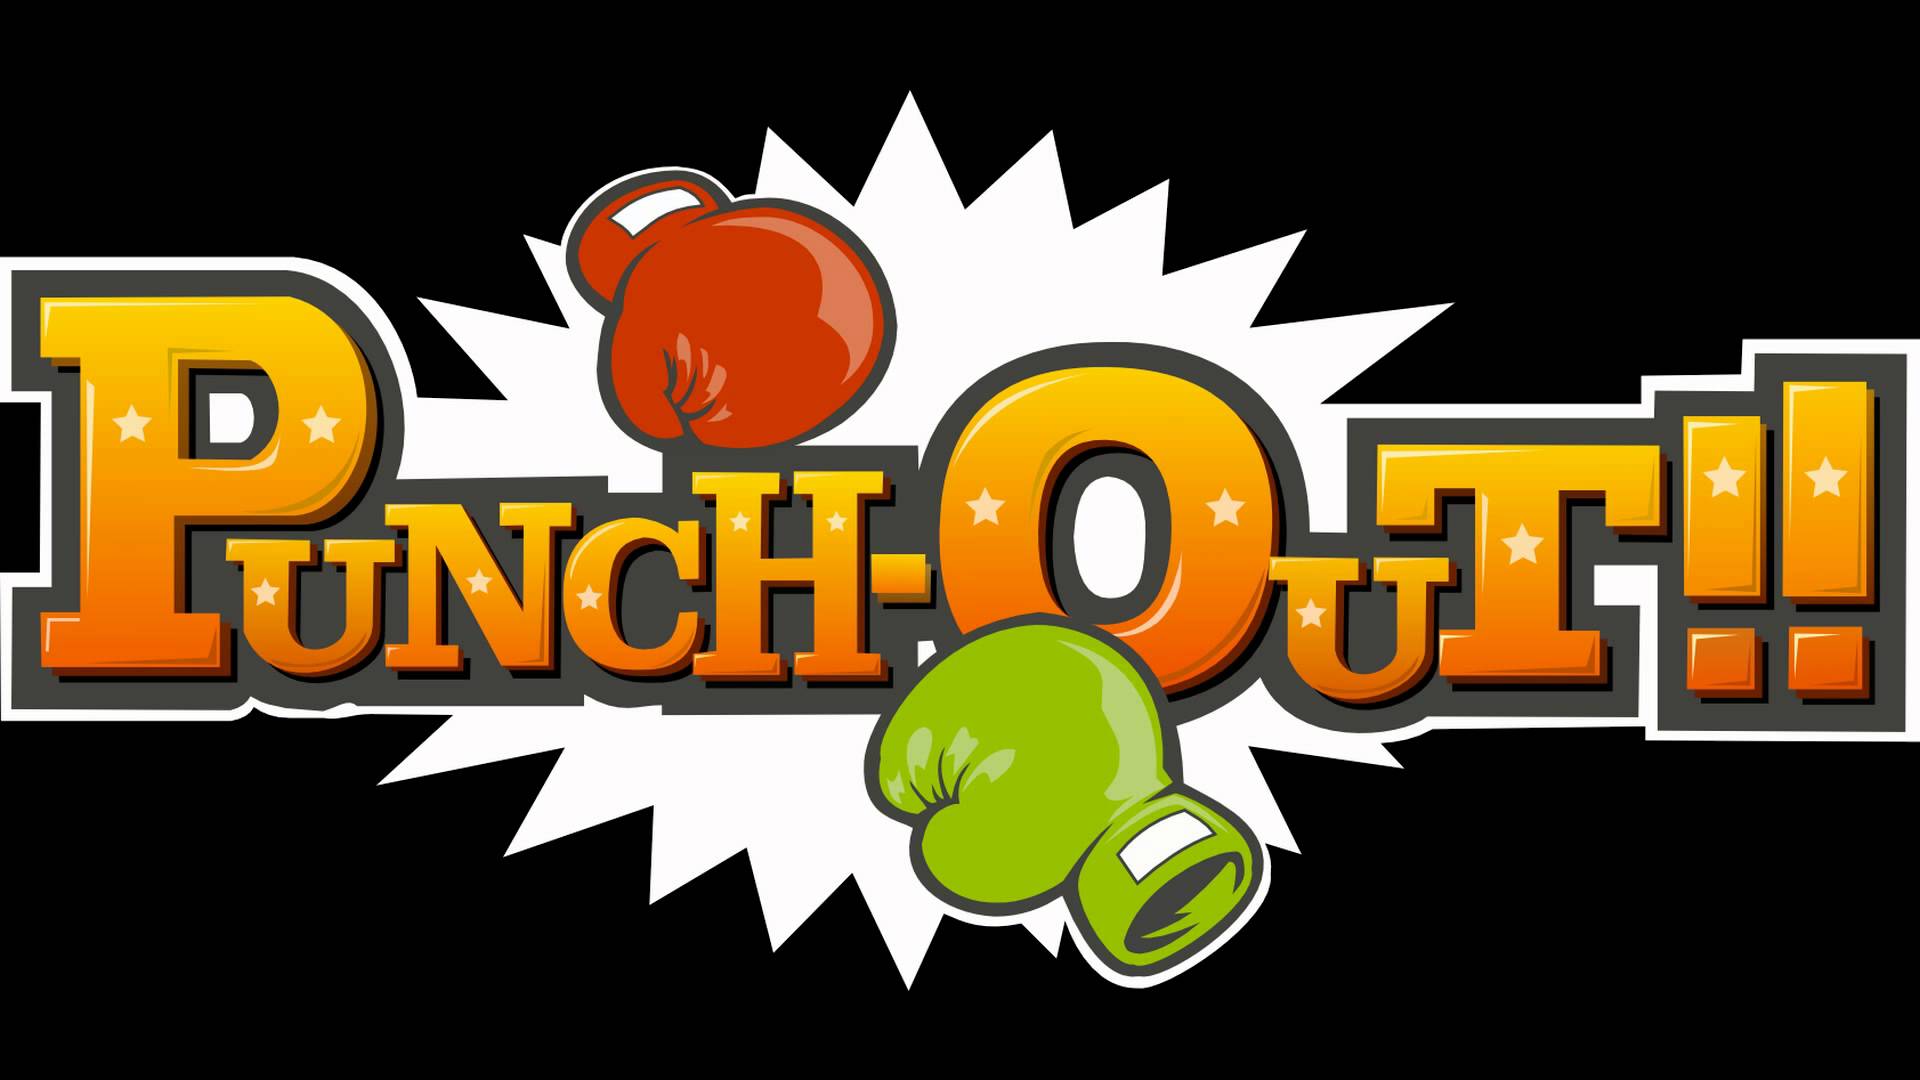 Punch-out!!